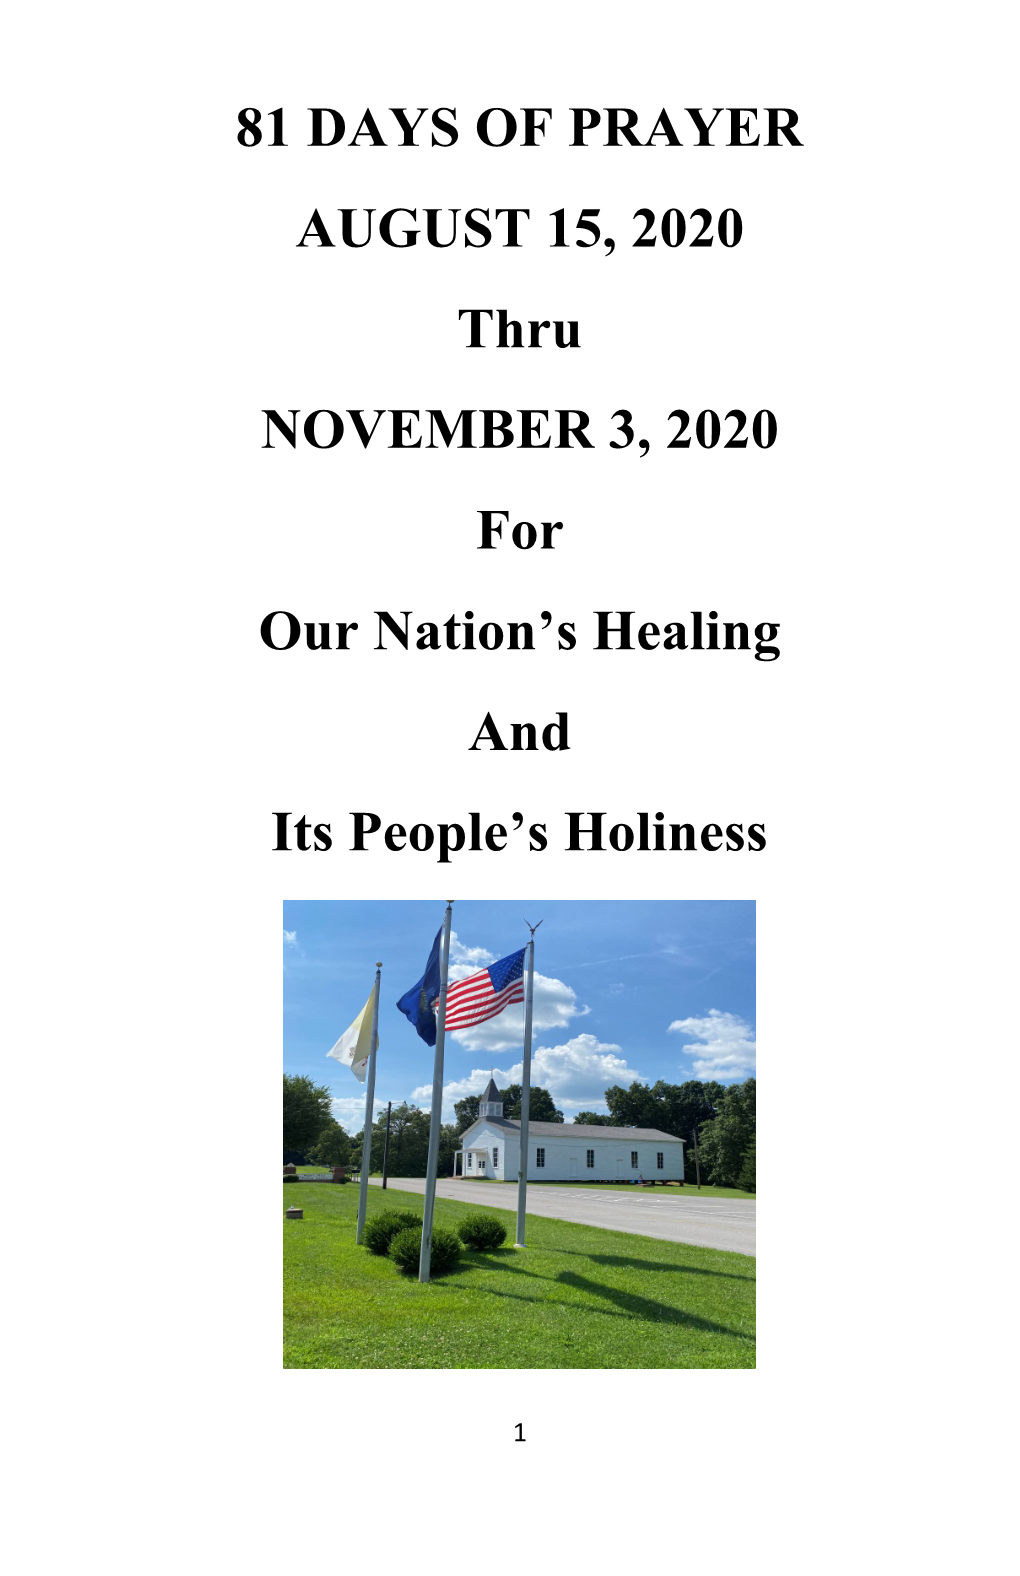 81 DAYS of PRAYER AUGUST 15, 2020 Thru NOVEMBER 3, 2020 for Our Nation’S Healing and Its People’S Holiness